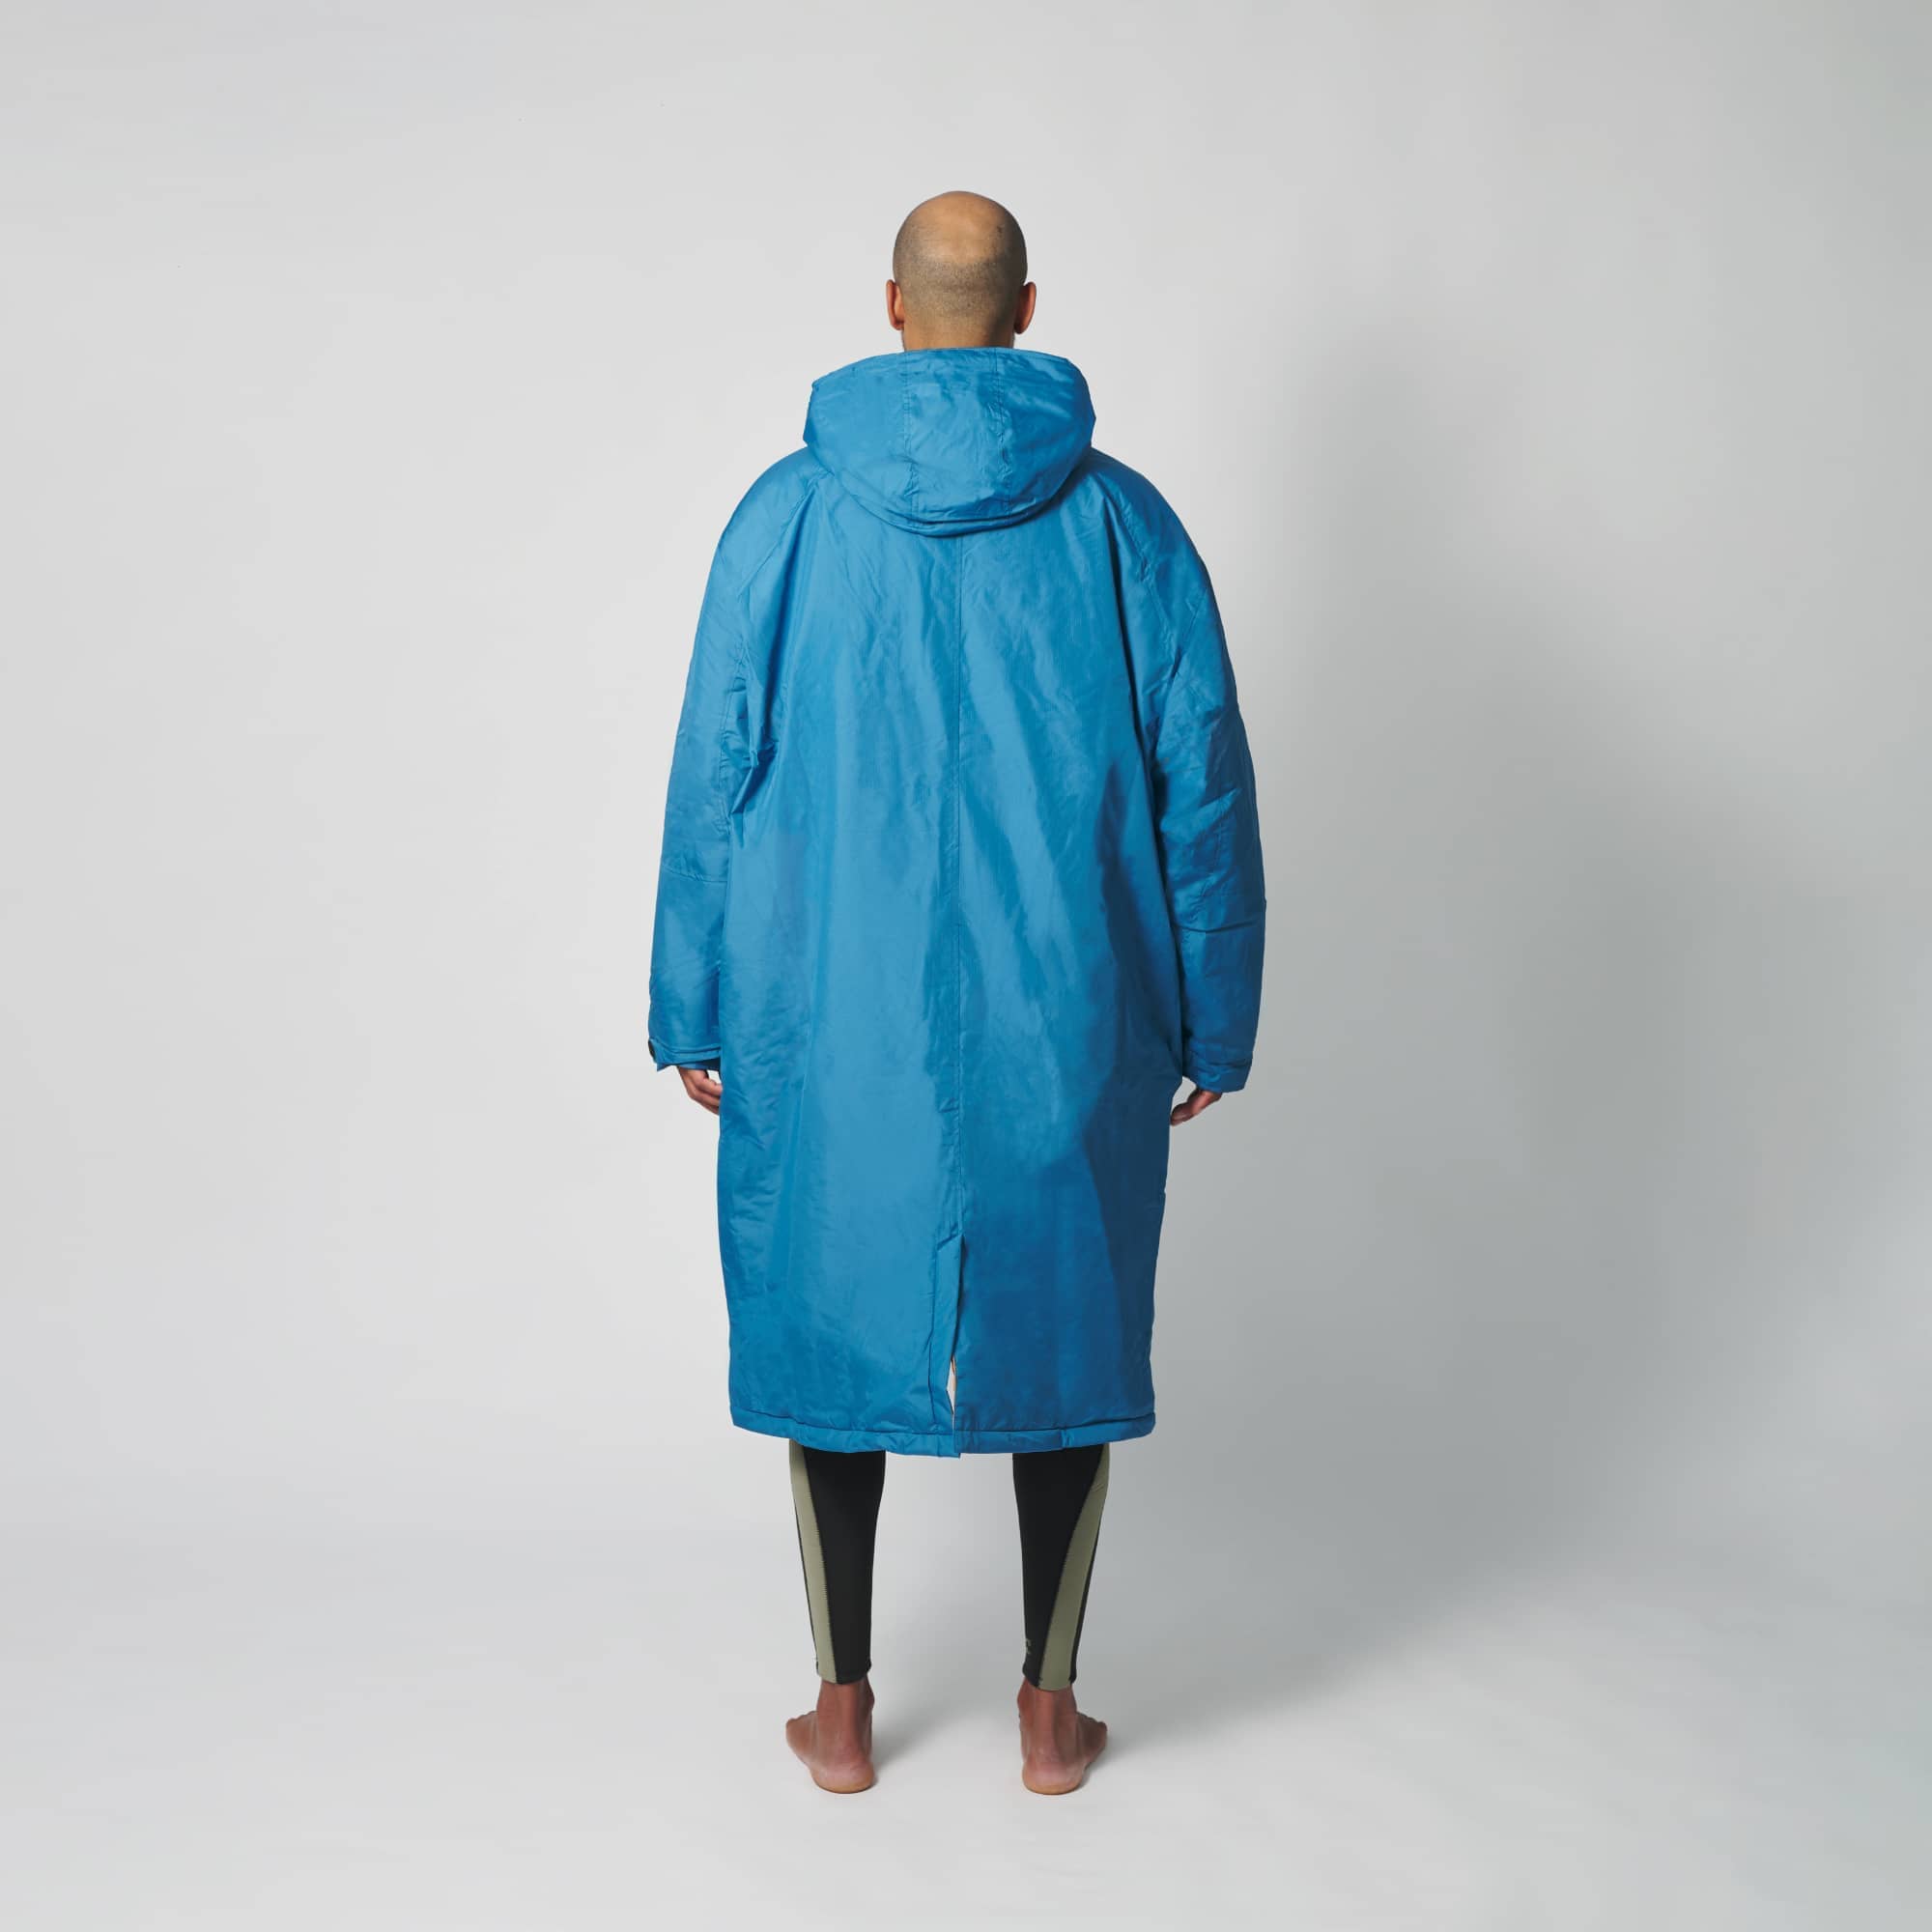 VOITED 2nd Edition Outdoor Changing Robe & Drycoat for Surfing, Camping, Vanlife & Wild Swimming - Blue Steel